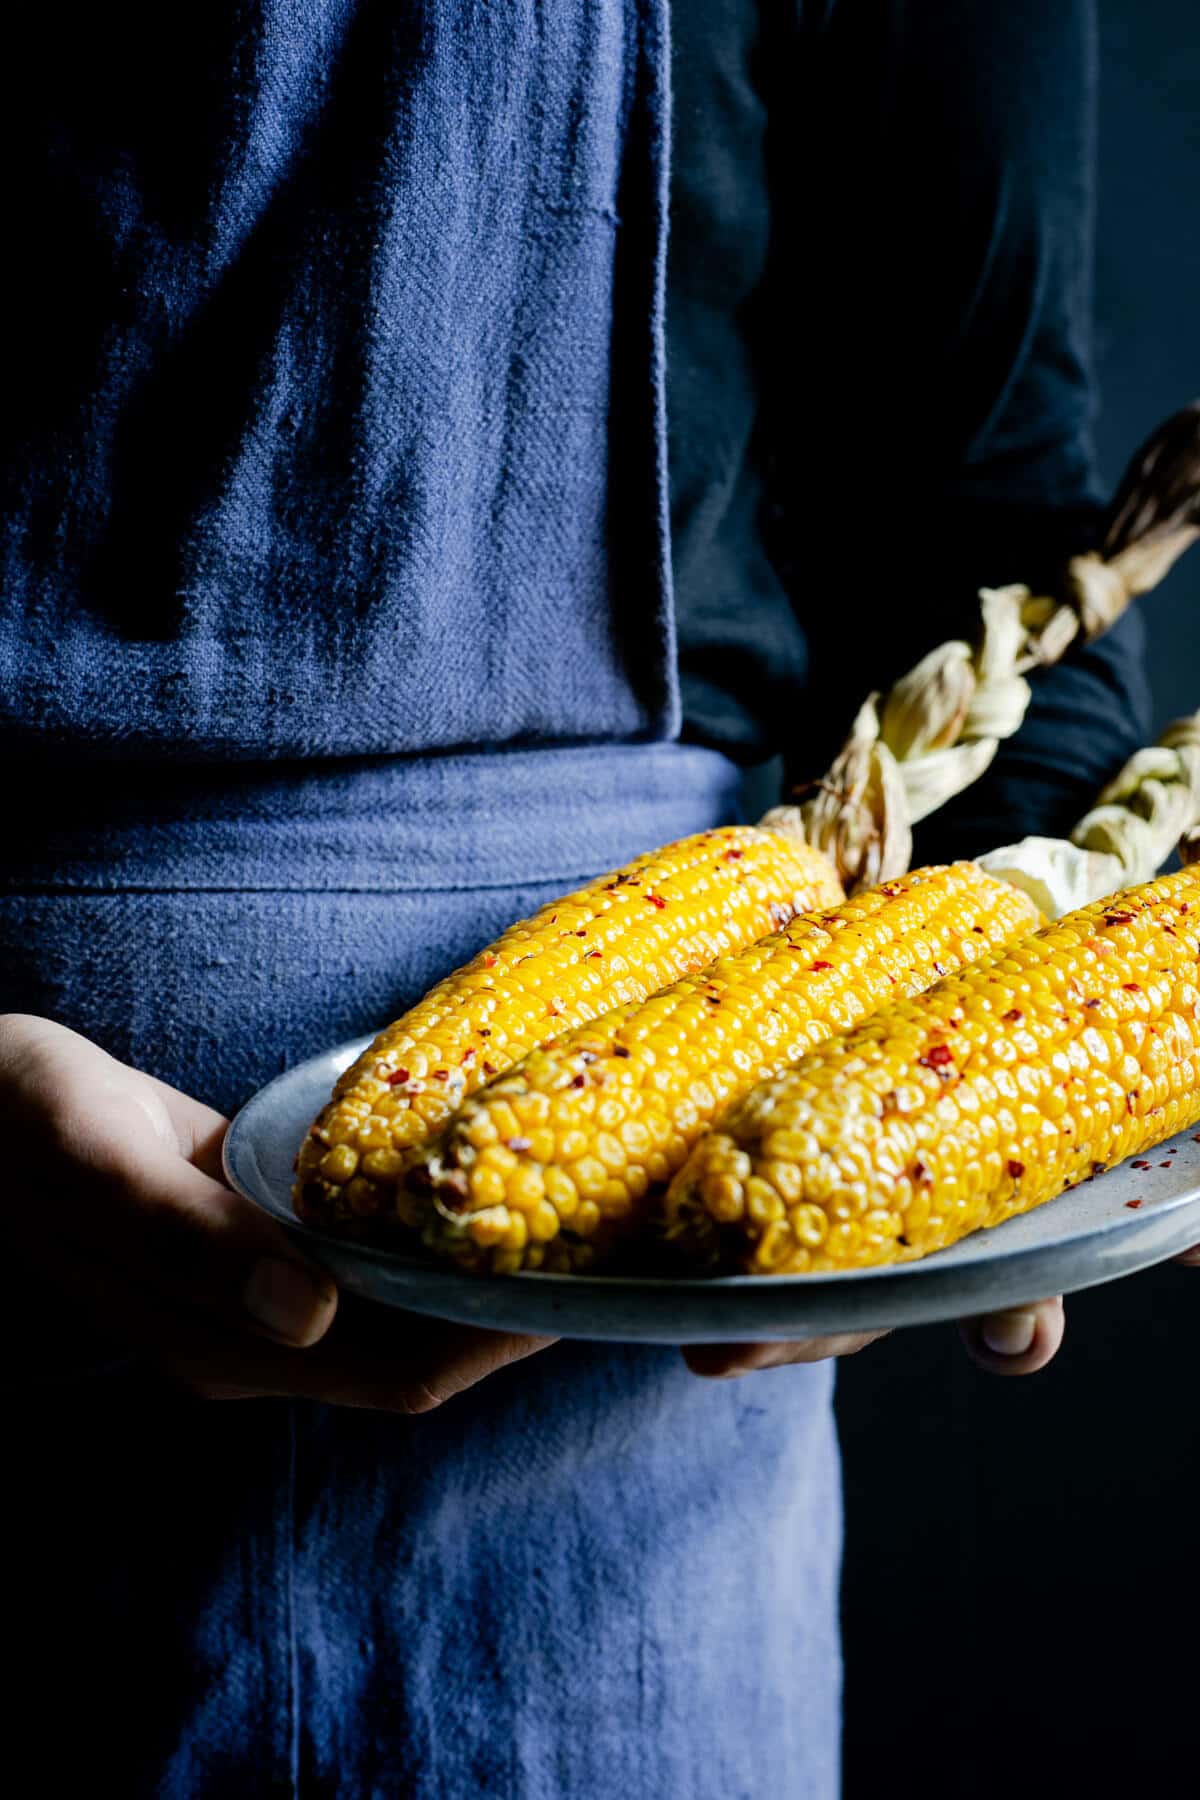 A person holding a plate with buttered corn on the cob